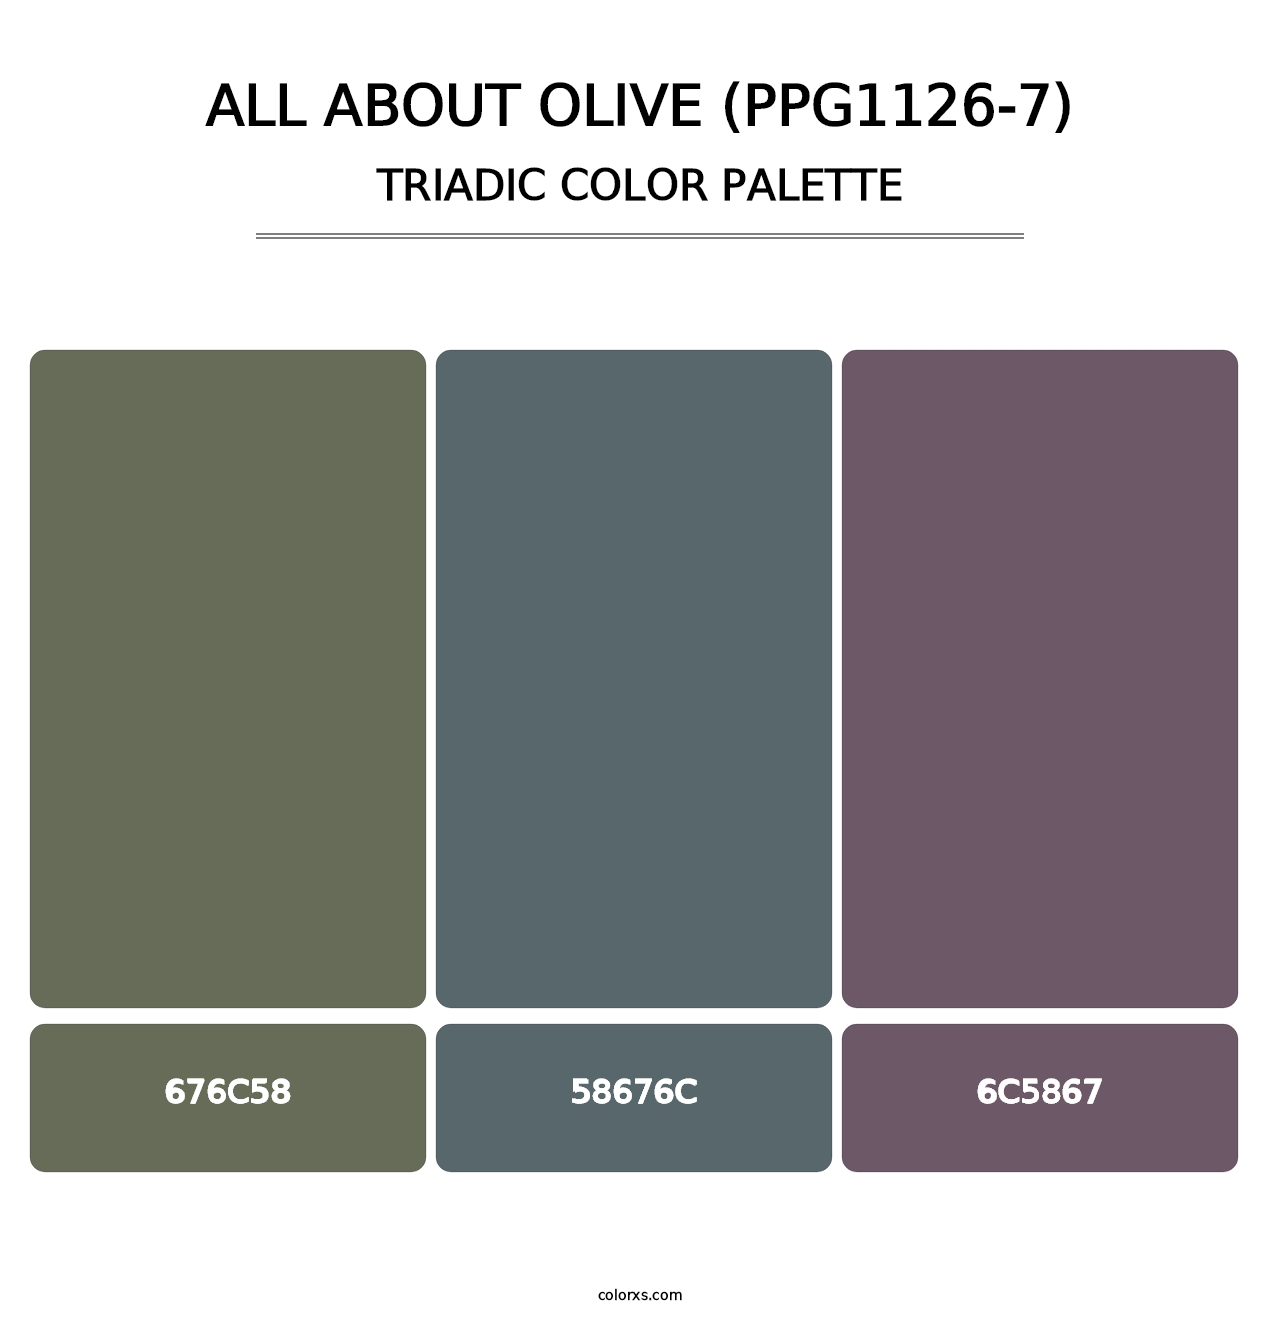 All About Olive (PPG1126-7) - Triadic Color Palette